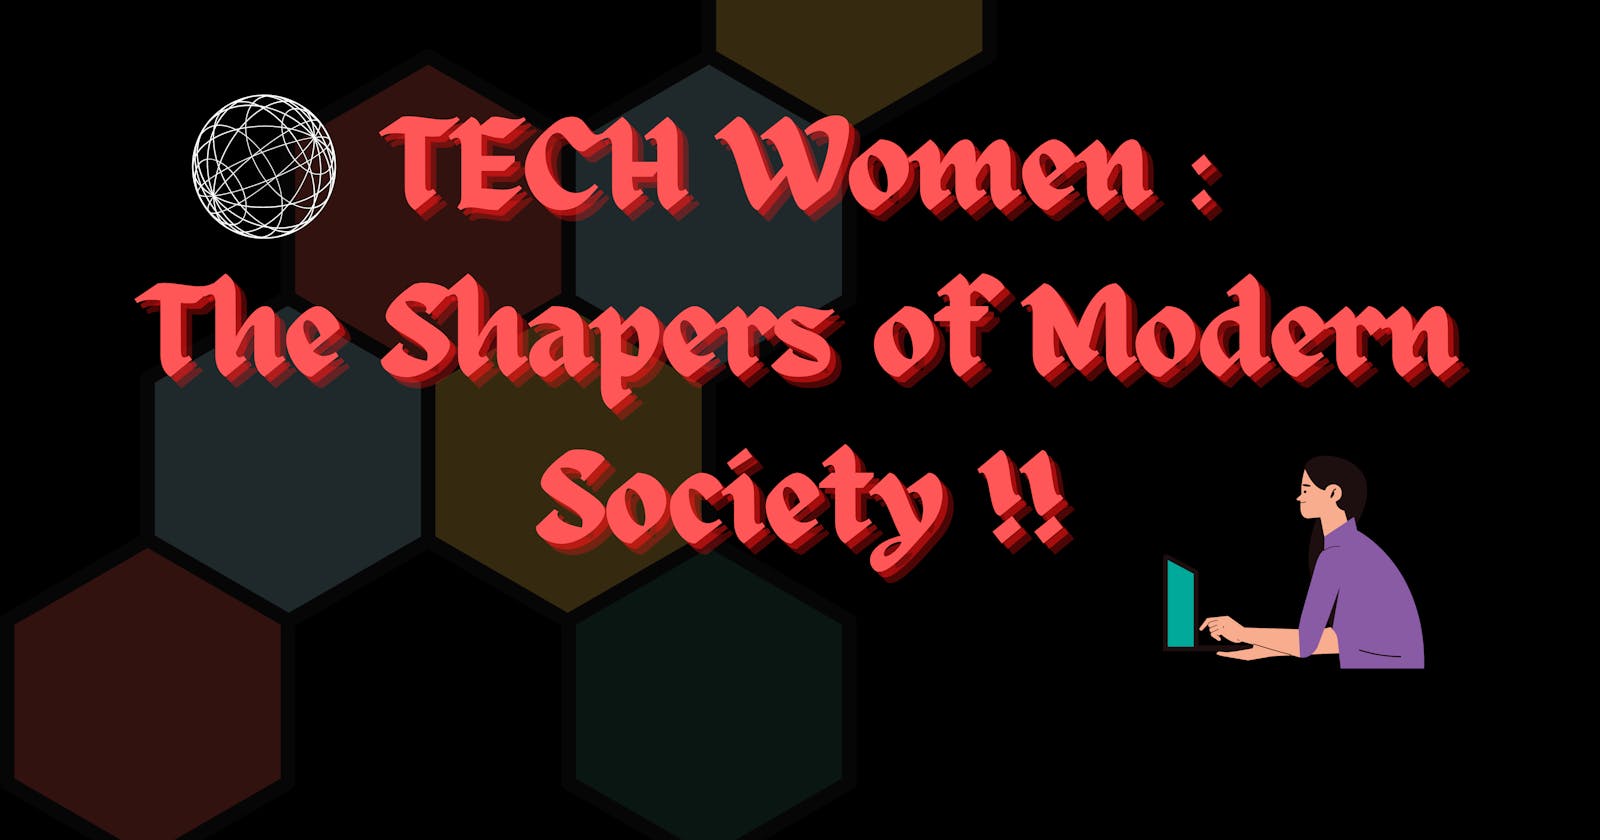 TECH Women – The Shapers of Modern Society